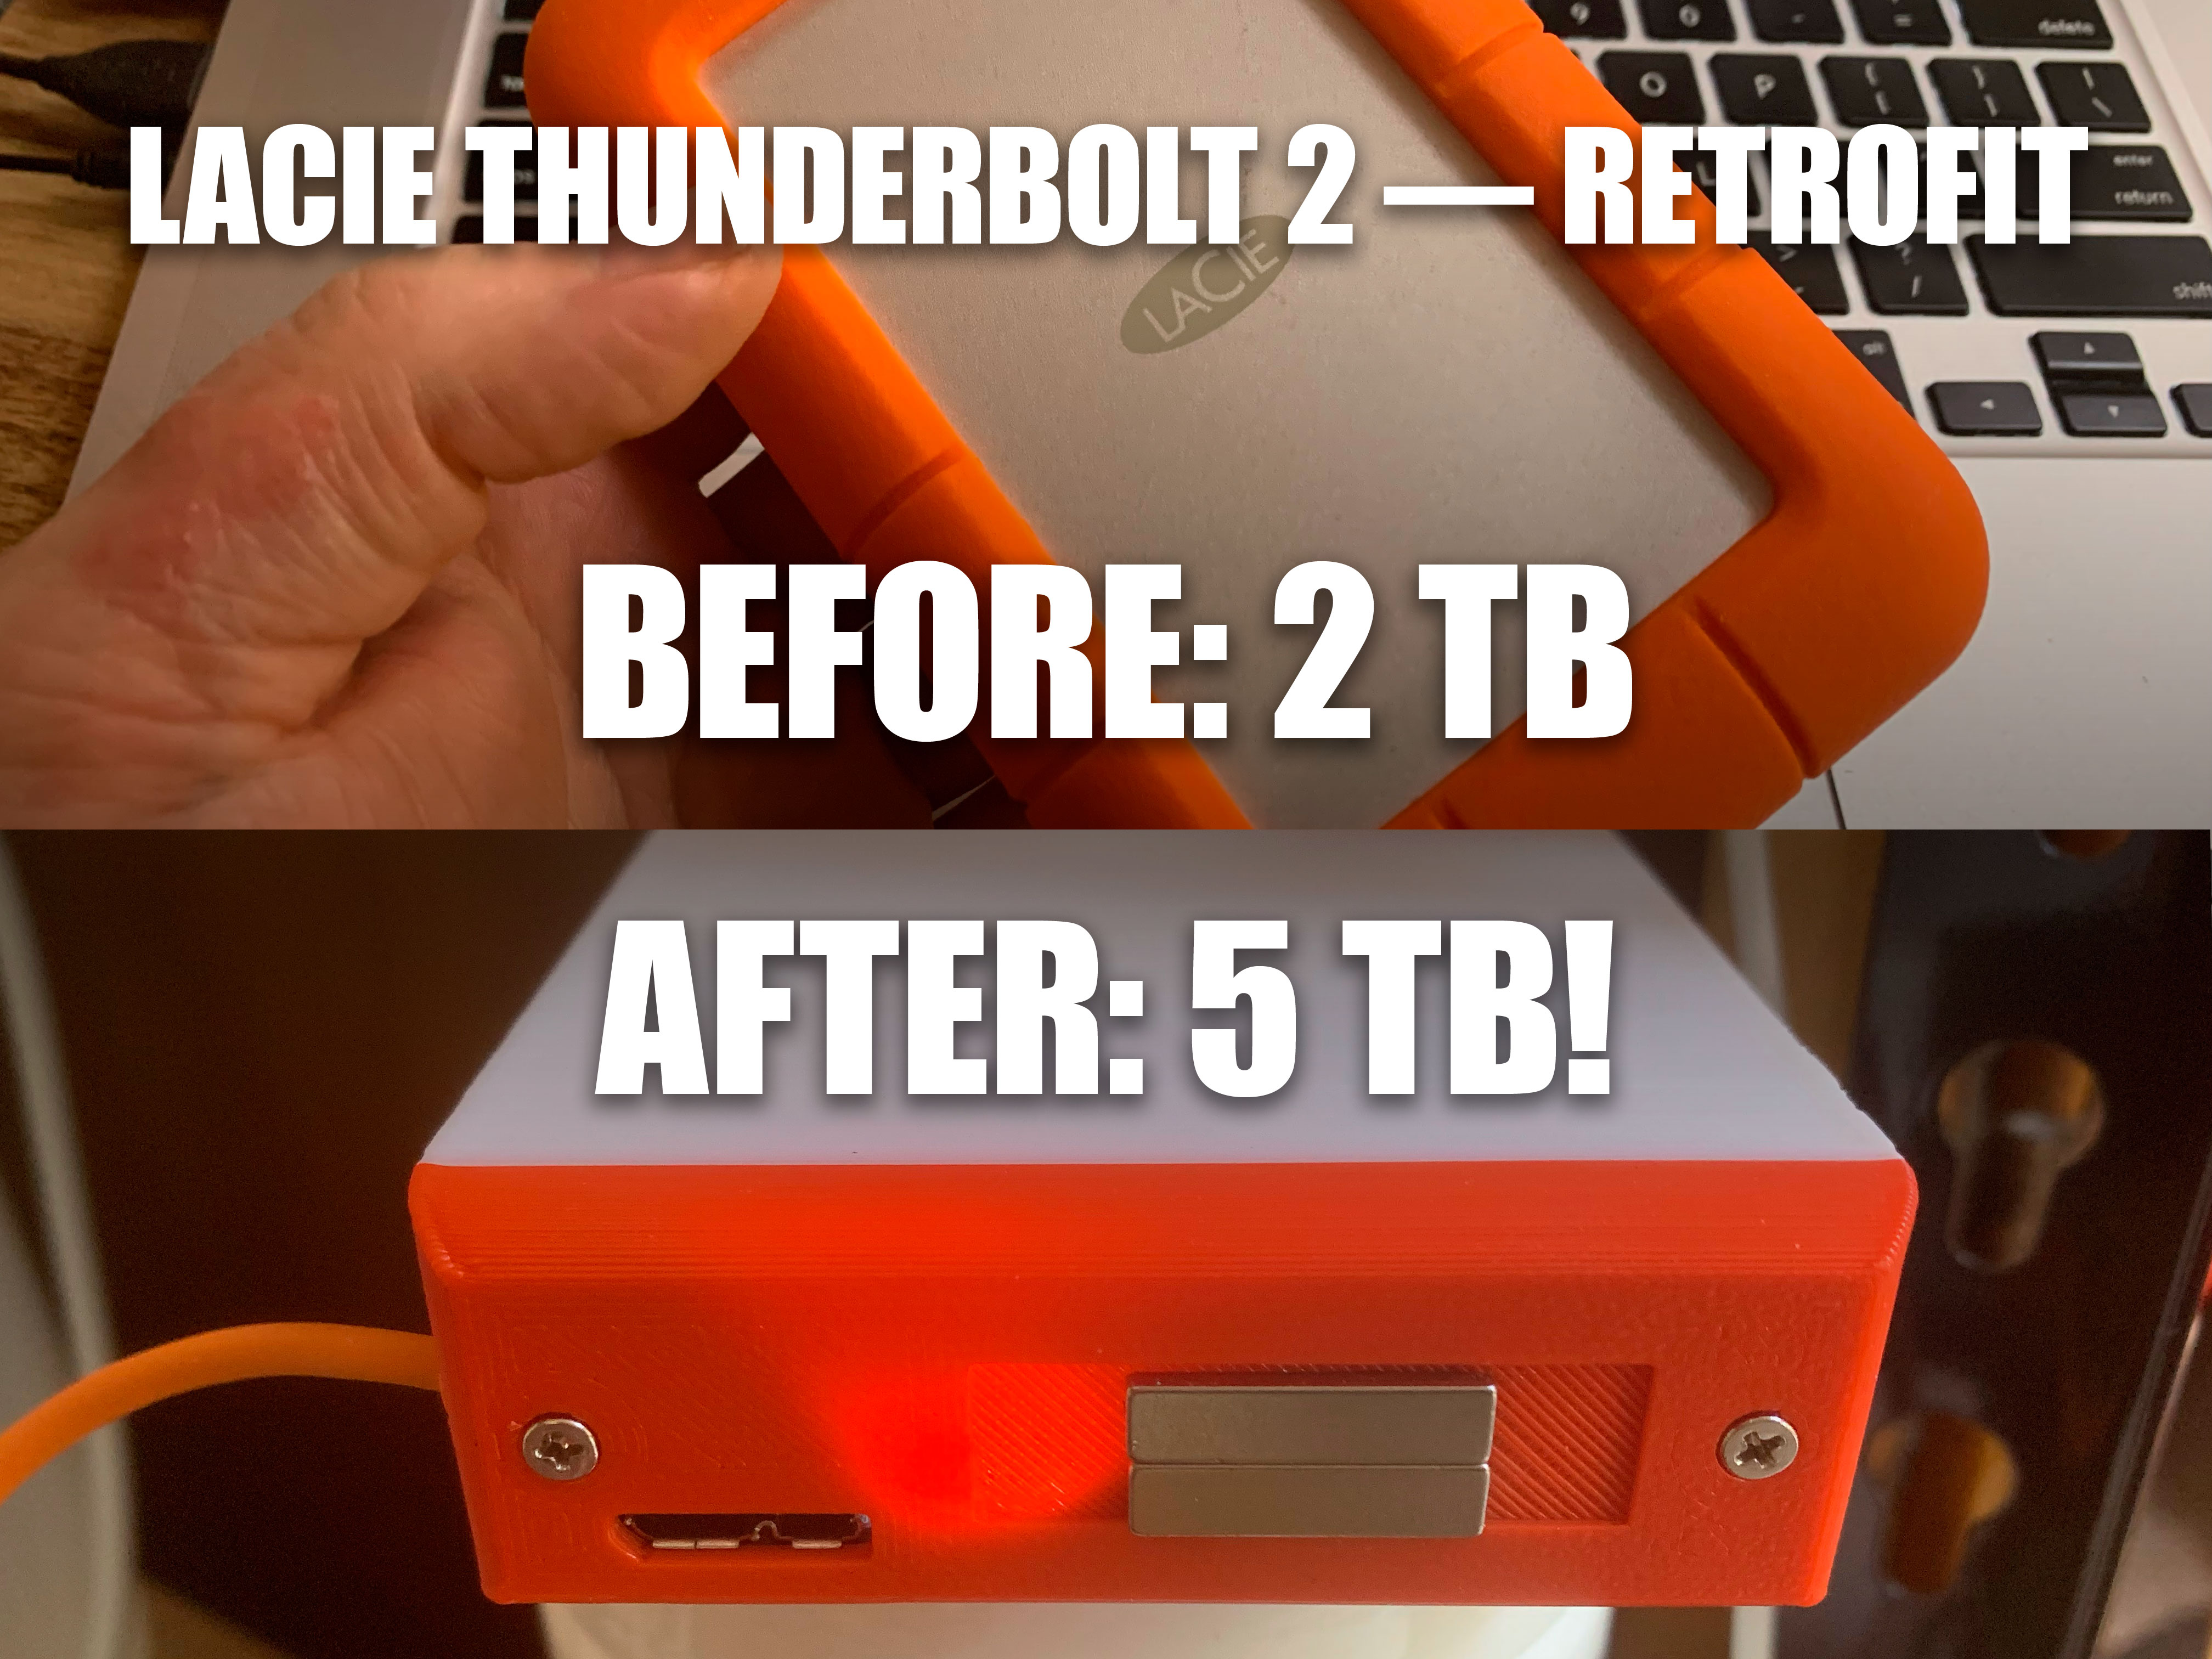 Larger HDD case for retrofitting LaCie Rugged Thunderbolt 2 interface with 5TB HDD - NO SUPPORTS NEEDED